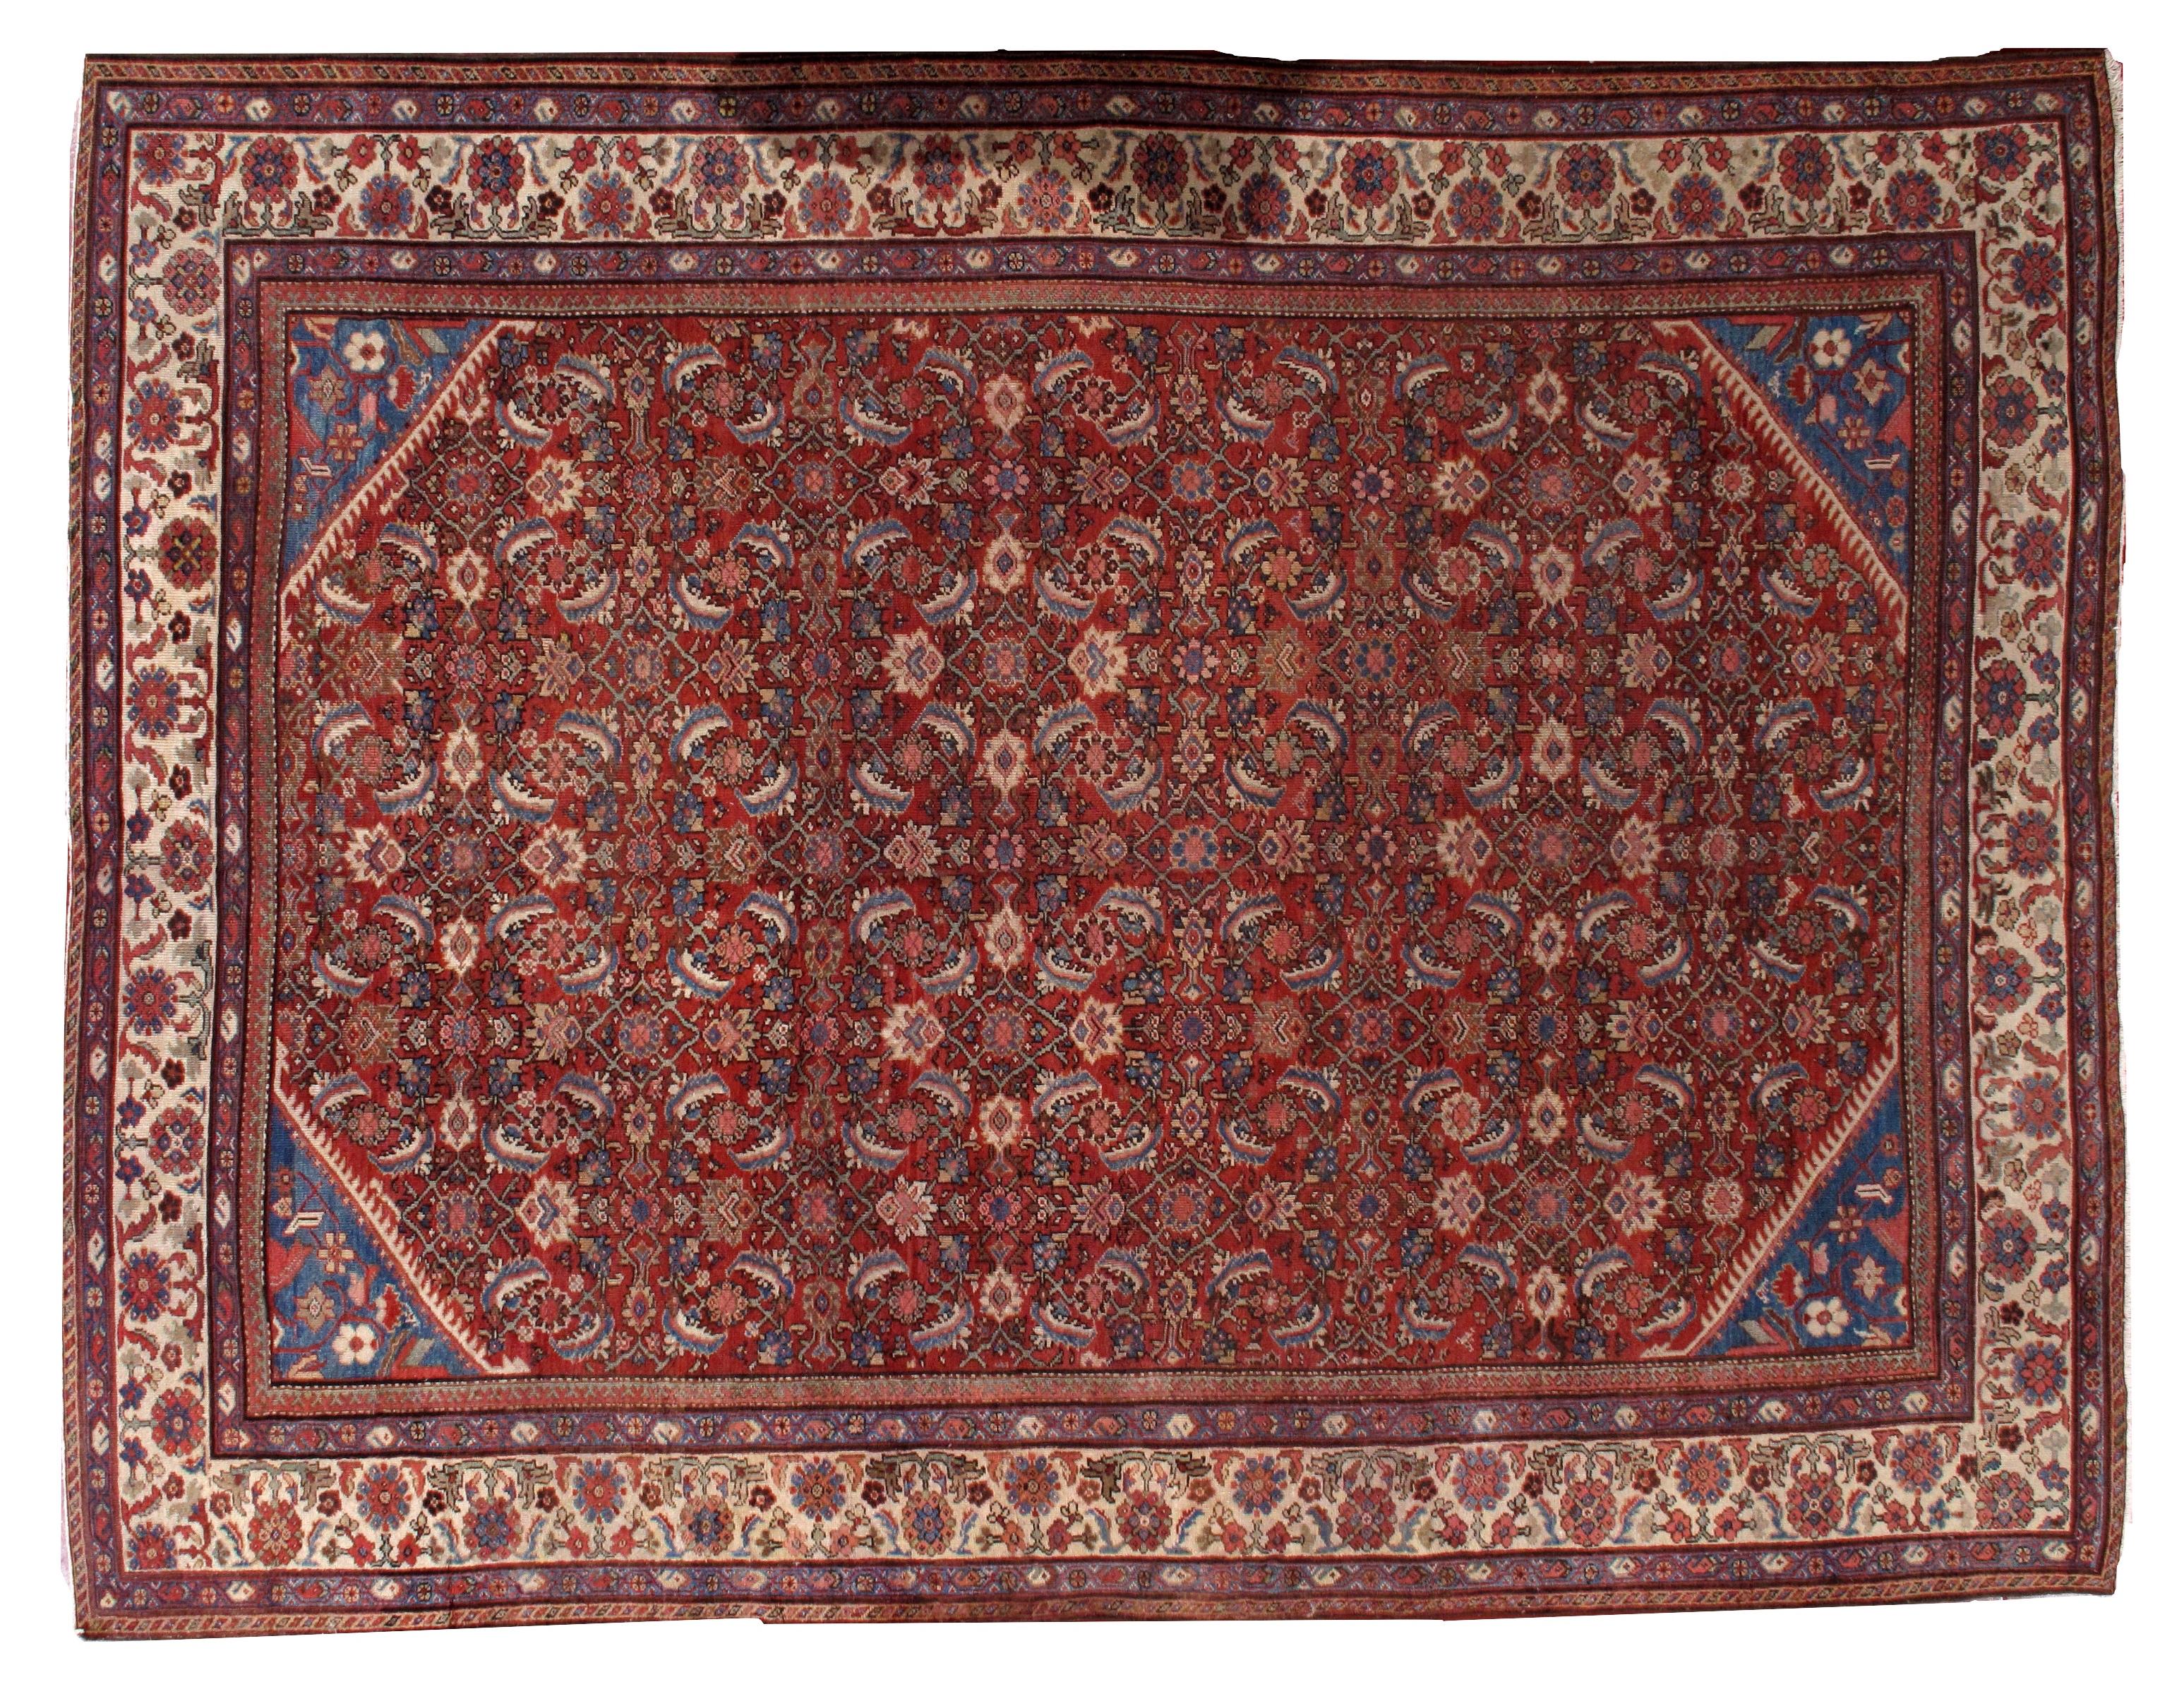 Antique Persian Mahal rug in good condition, bright red colour with some blue and cream accents.